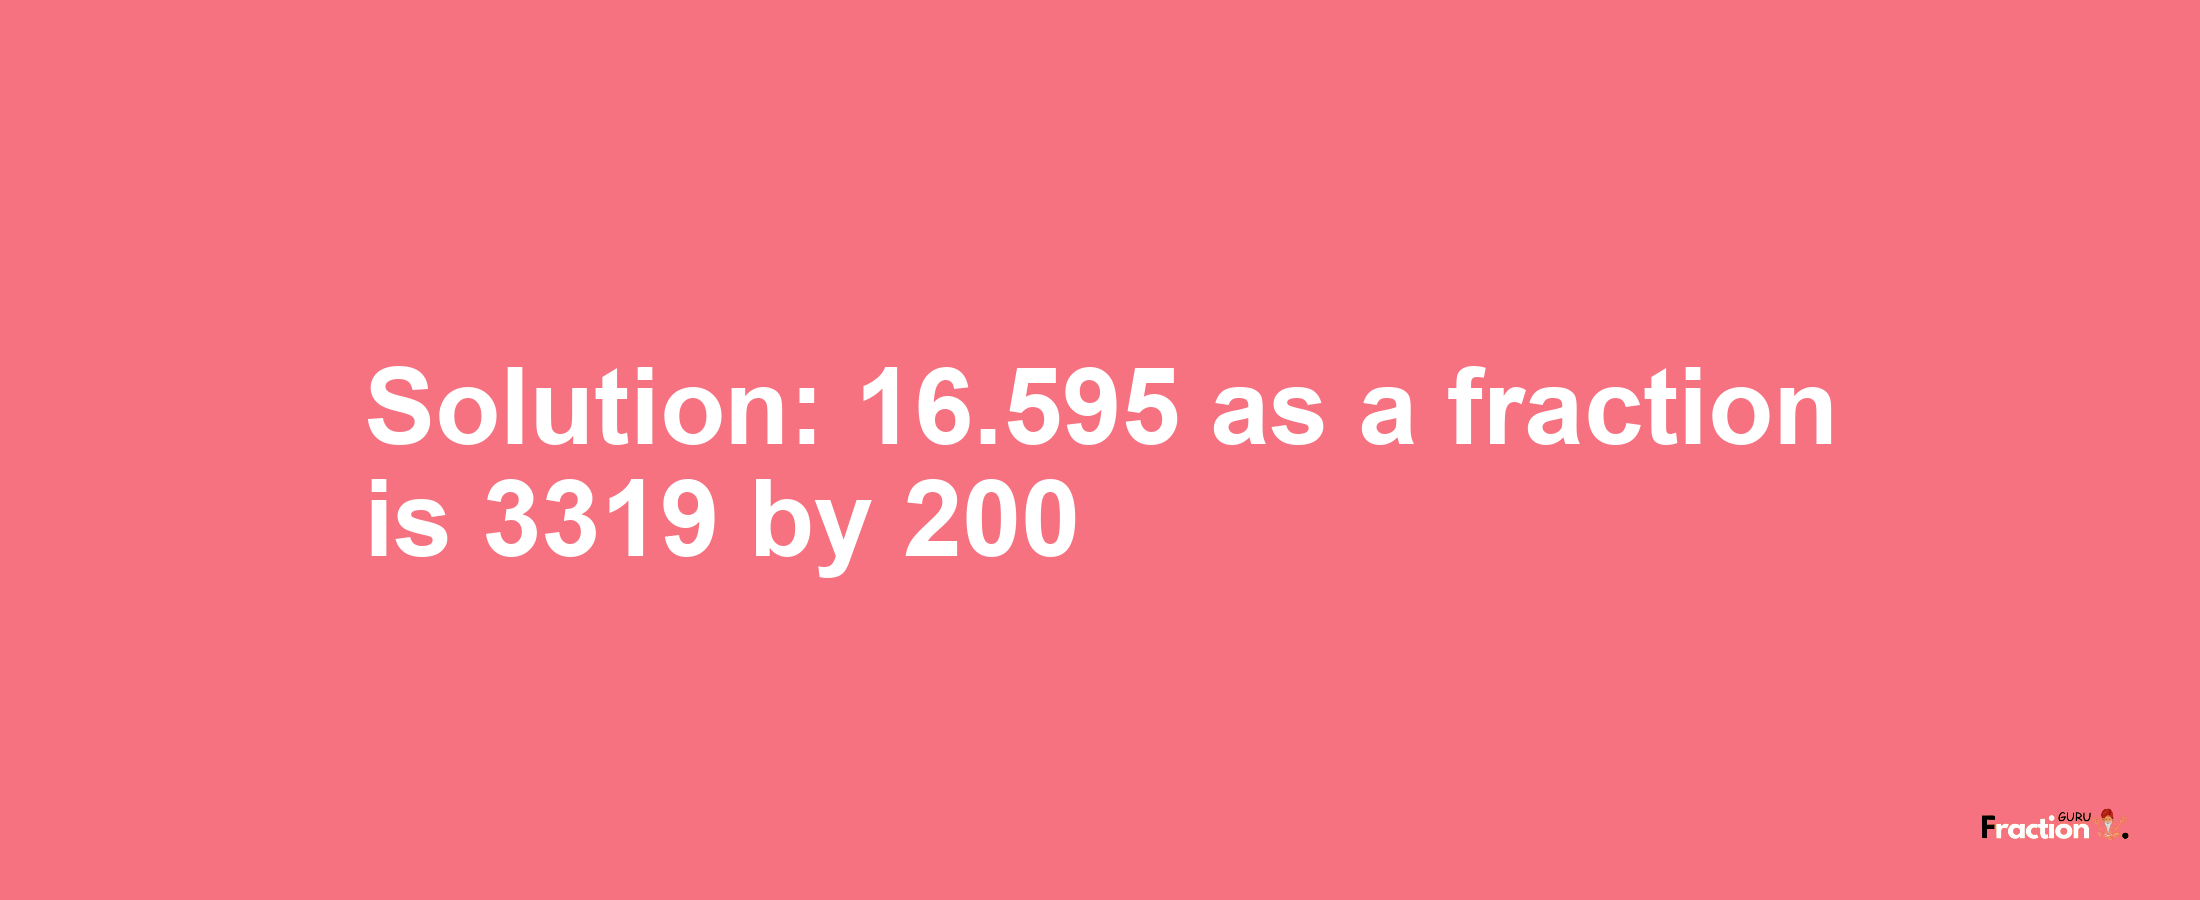 Solution:16.595 as a fraction is 3319/200